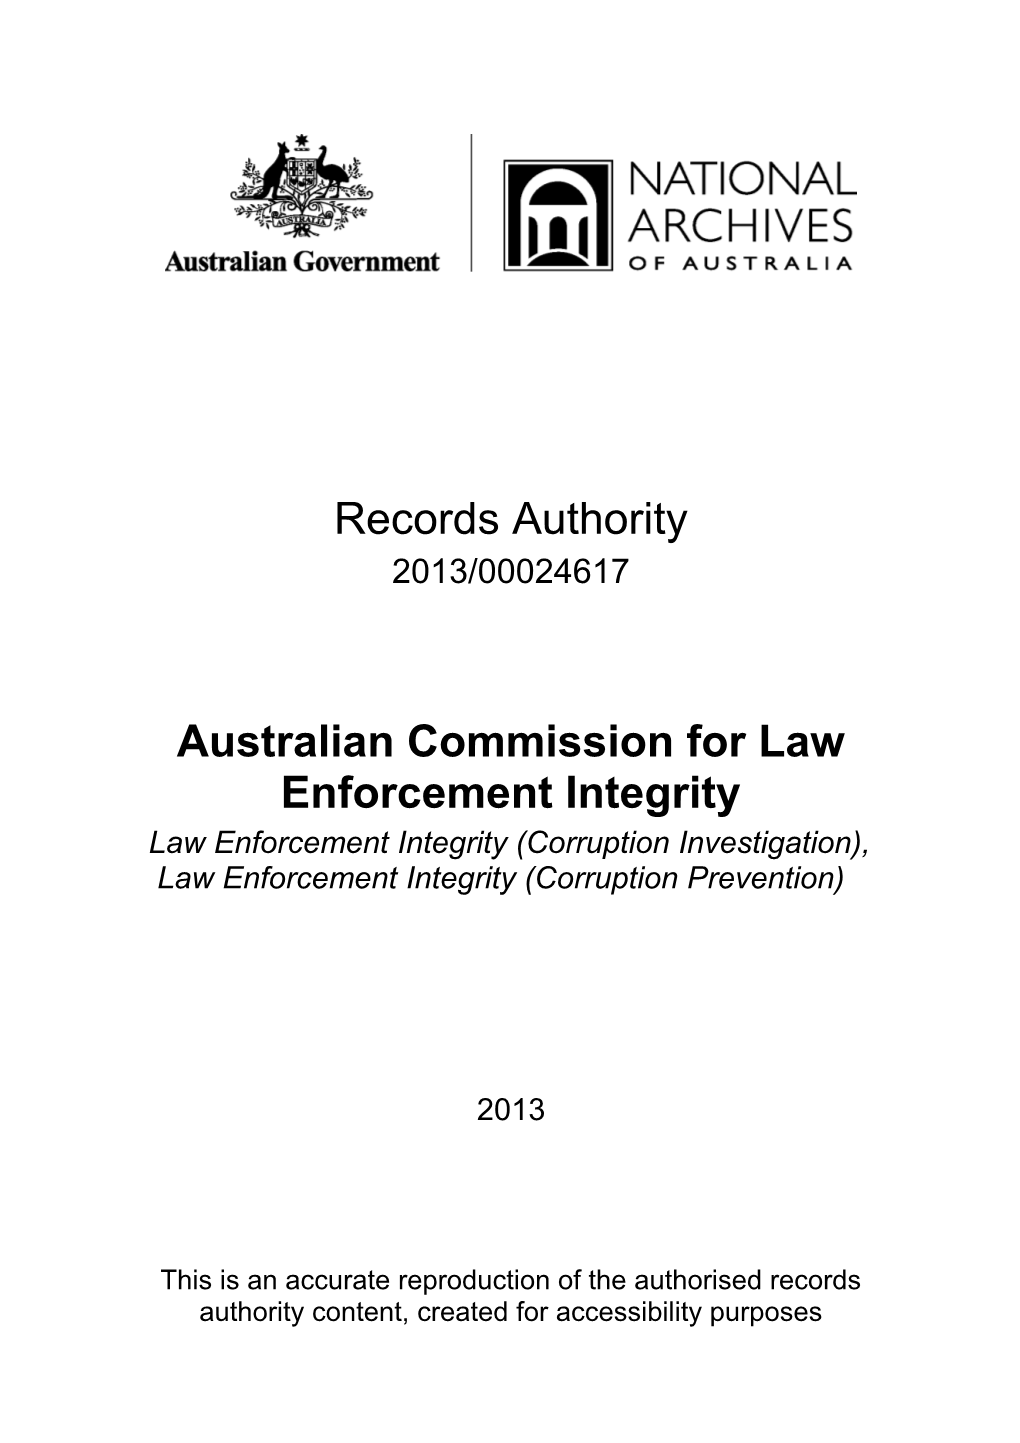 Australian Commission for Law Enforcement Integrity (ACLEI) - Records Authority - 2013 00024617